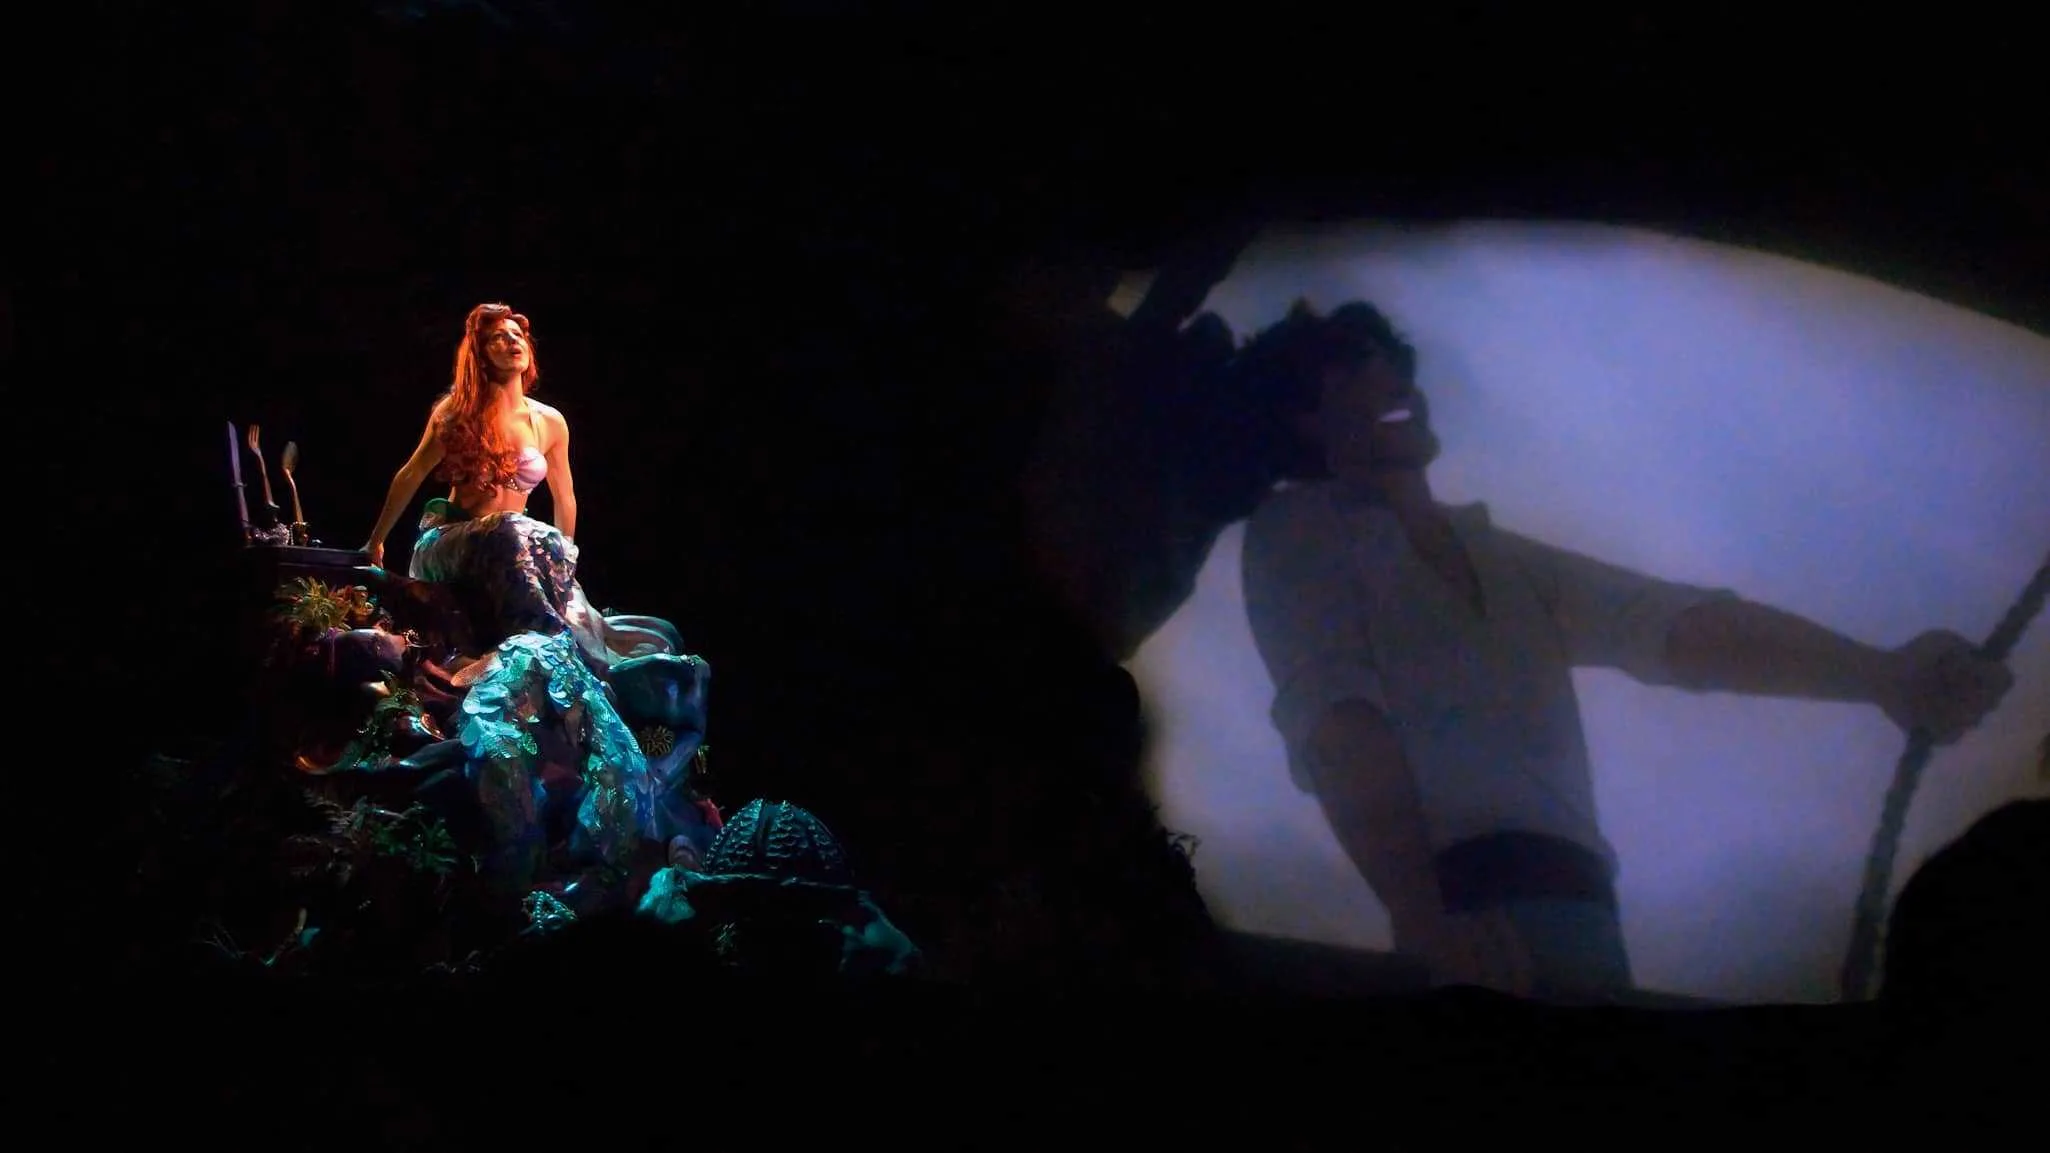 Voyage of Little Mermaid – Temporarily Unavailable